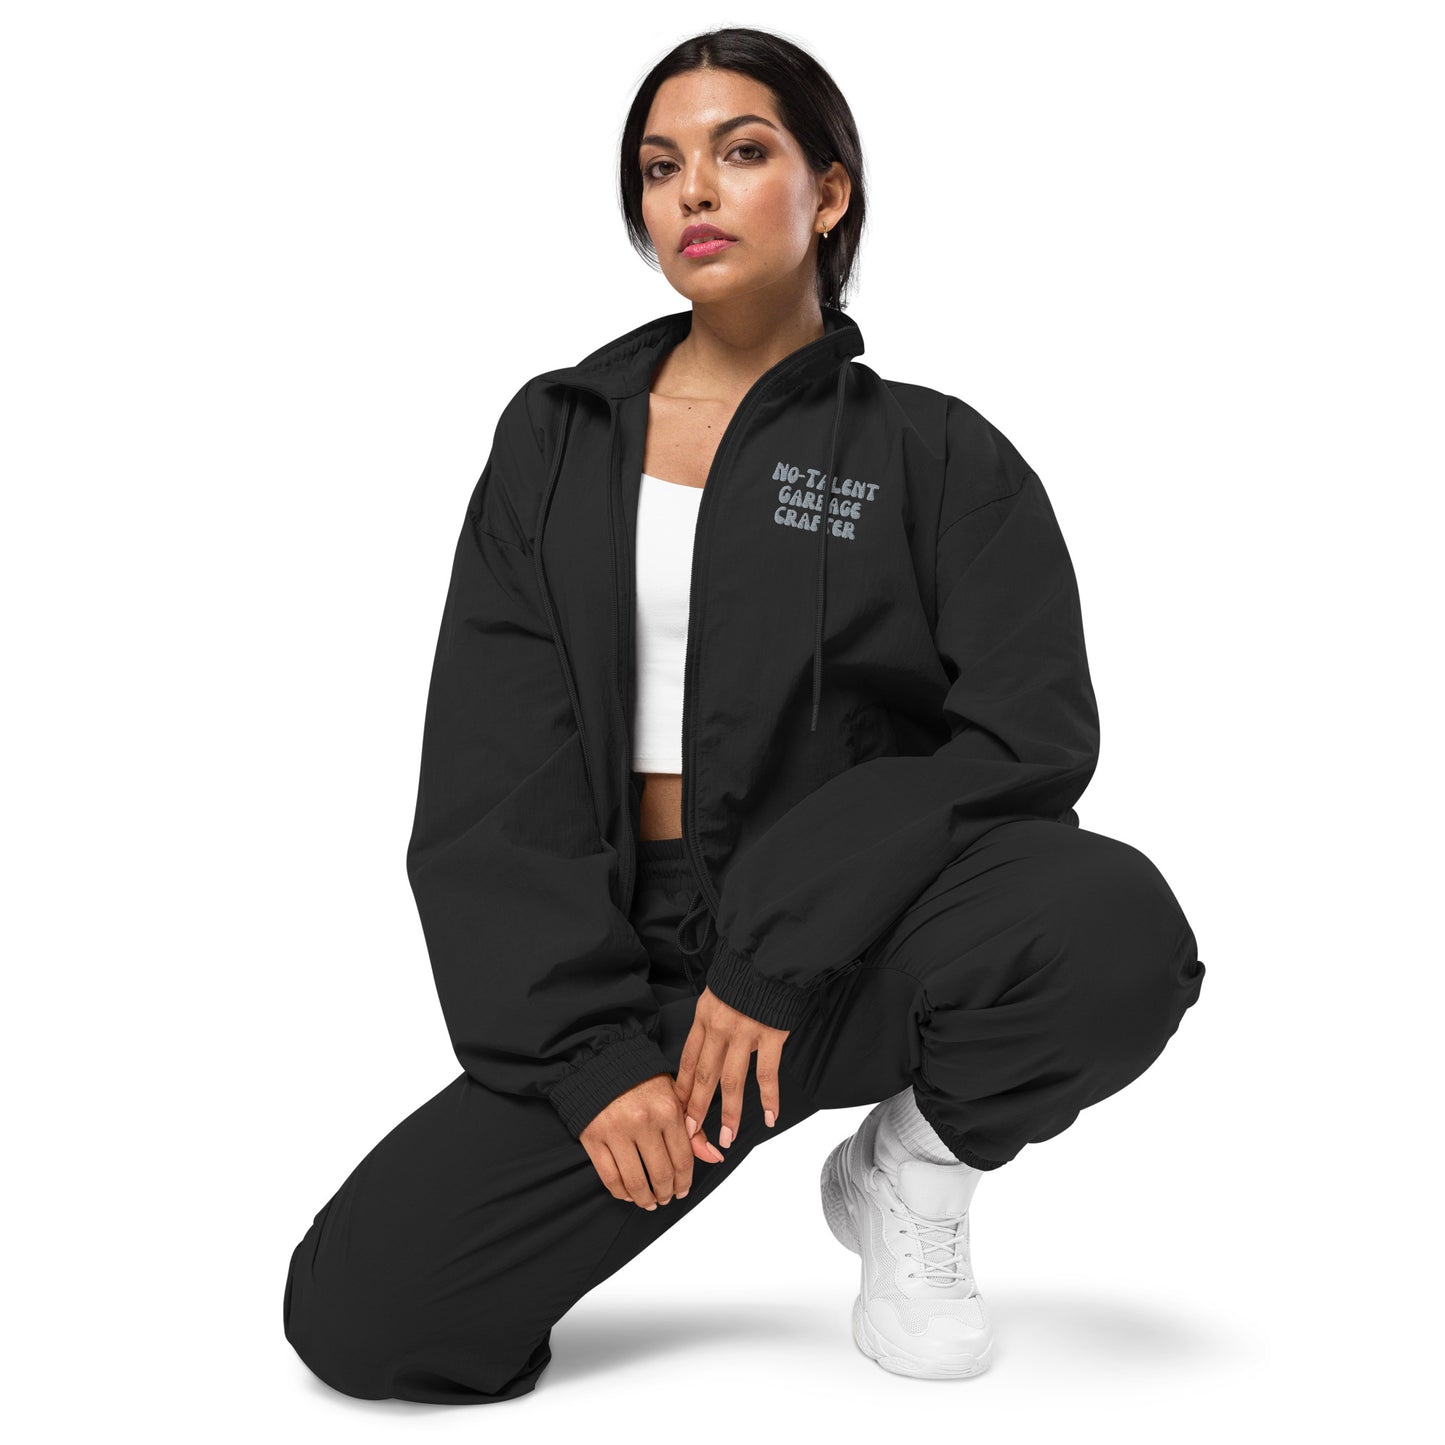 No-Talent Garbage Crafter- Recycled tracksuit jacket